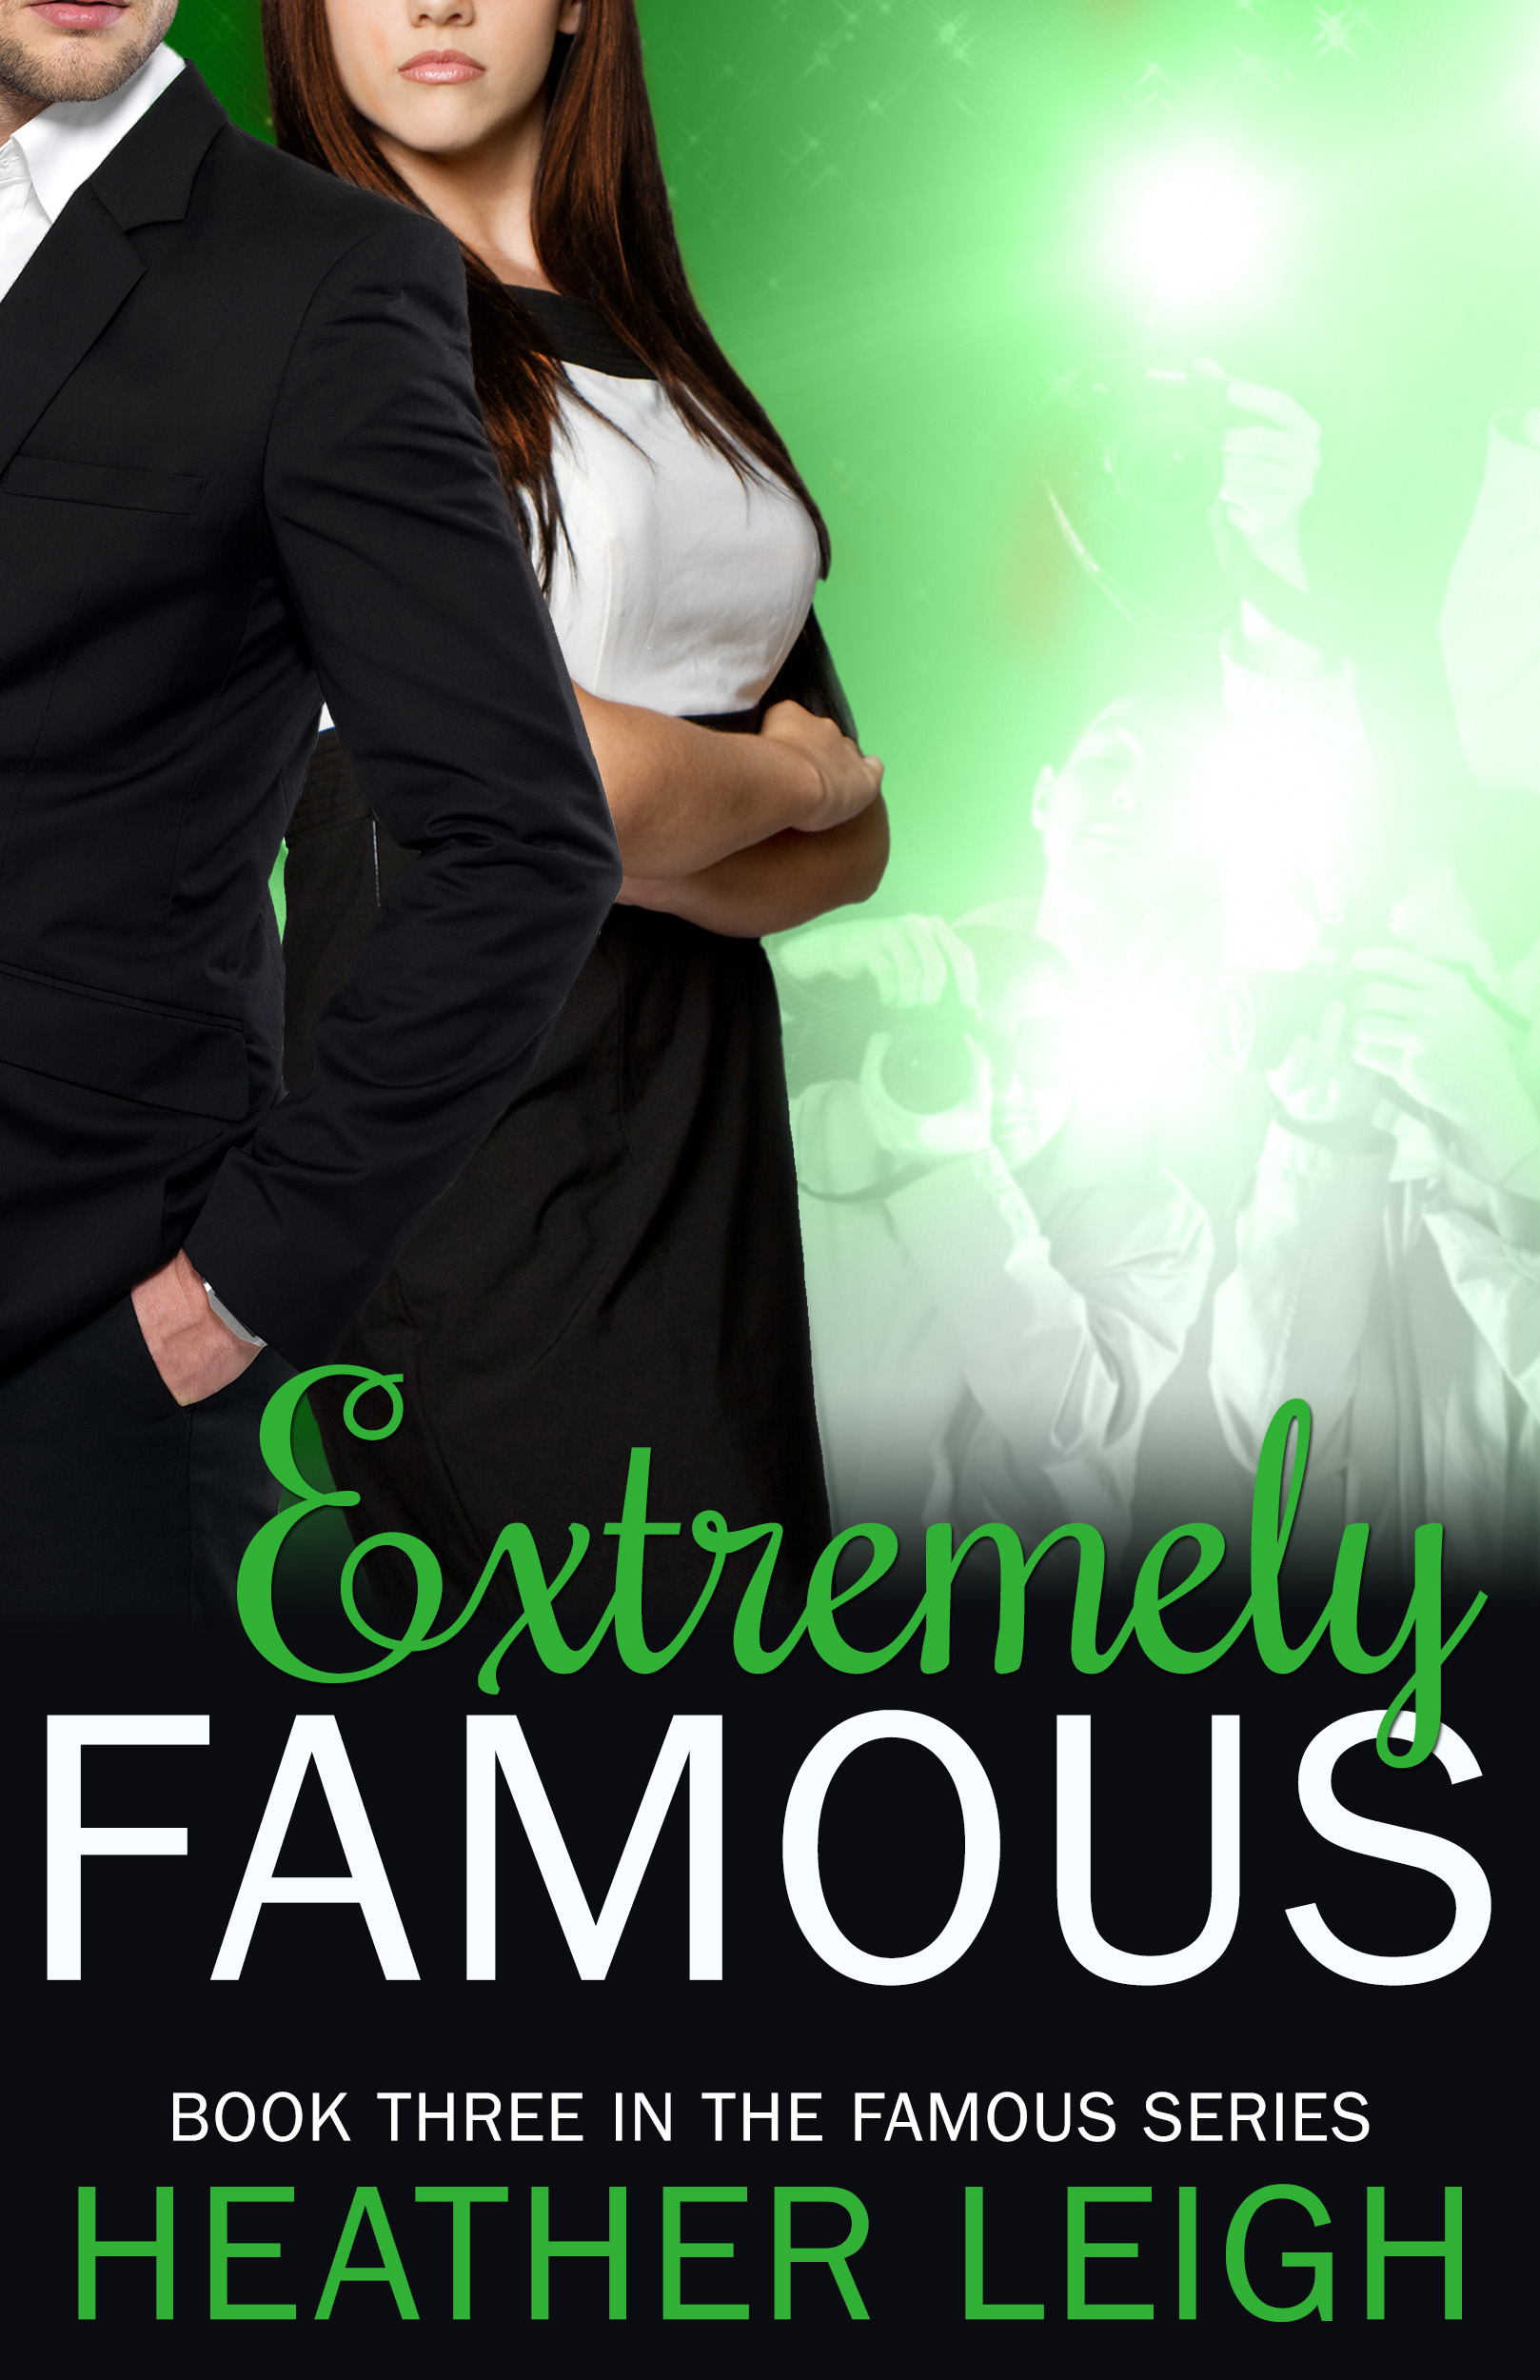 Extremely Famous Release Celebration Giveaway!